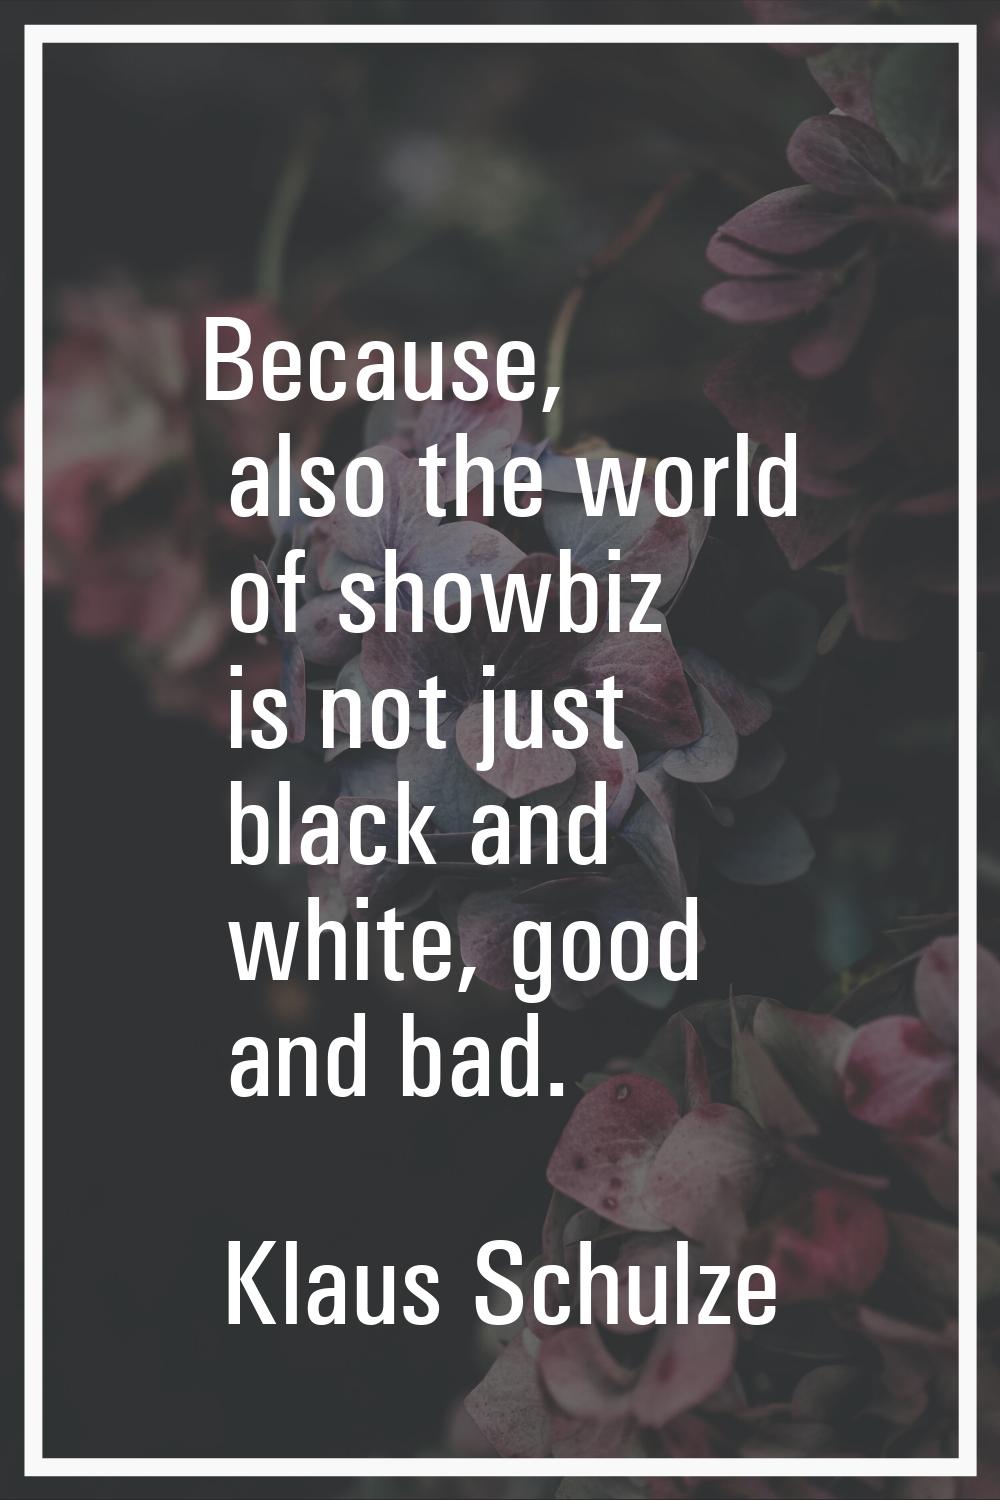 Because, also the world of showbiz is not just black and white, good and bad.